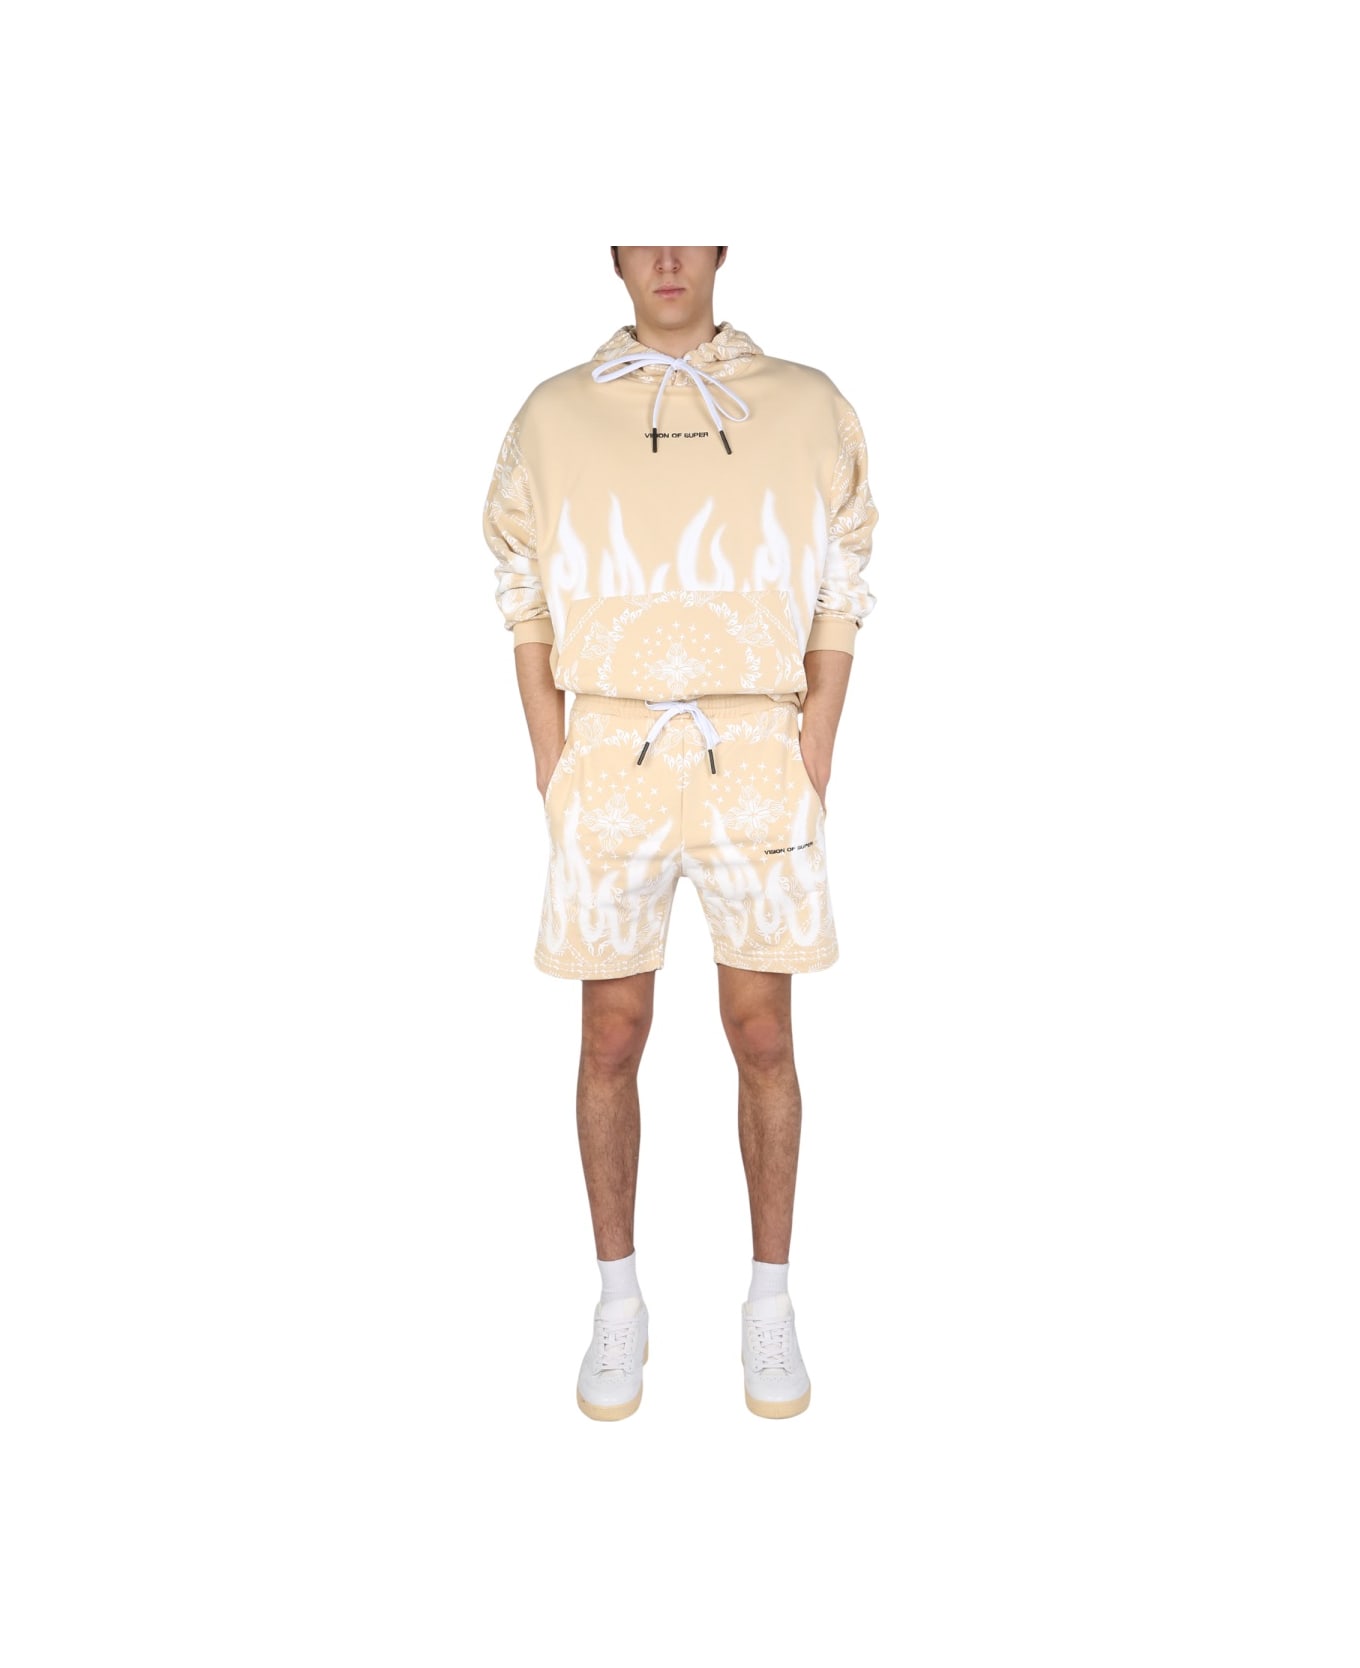 Vision of Super Sweatshirt With Paisley Pattern - BEIGE